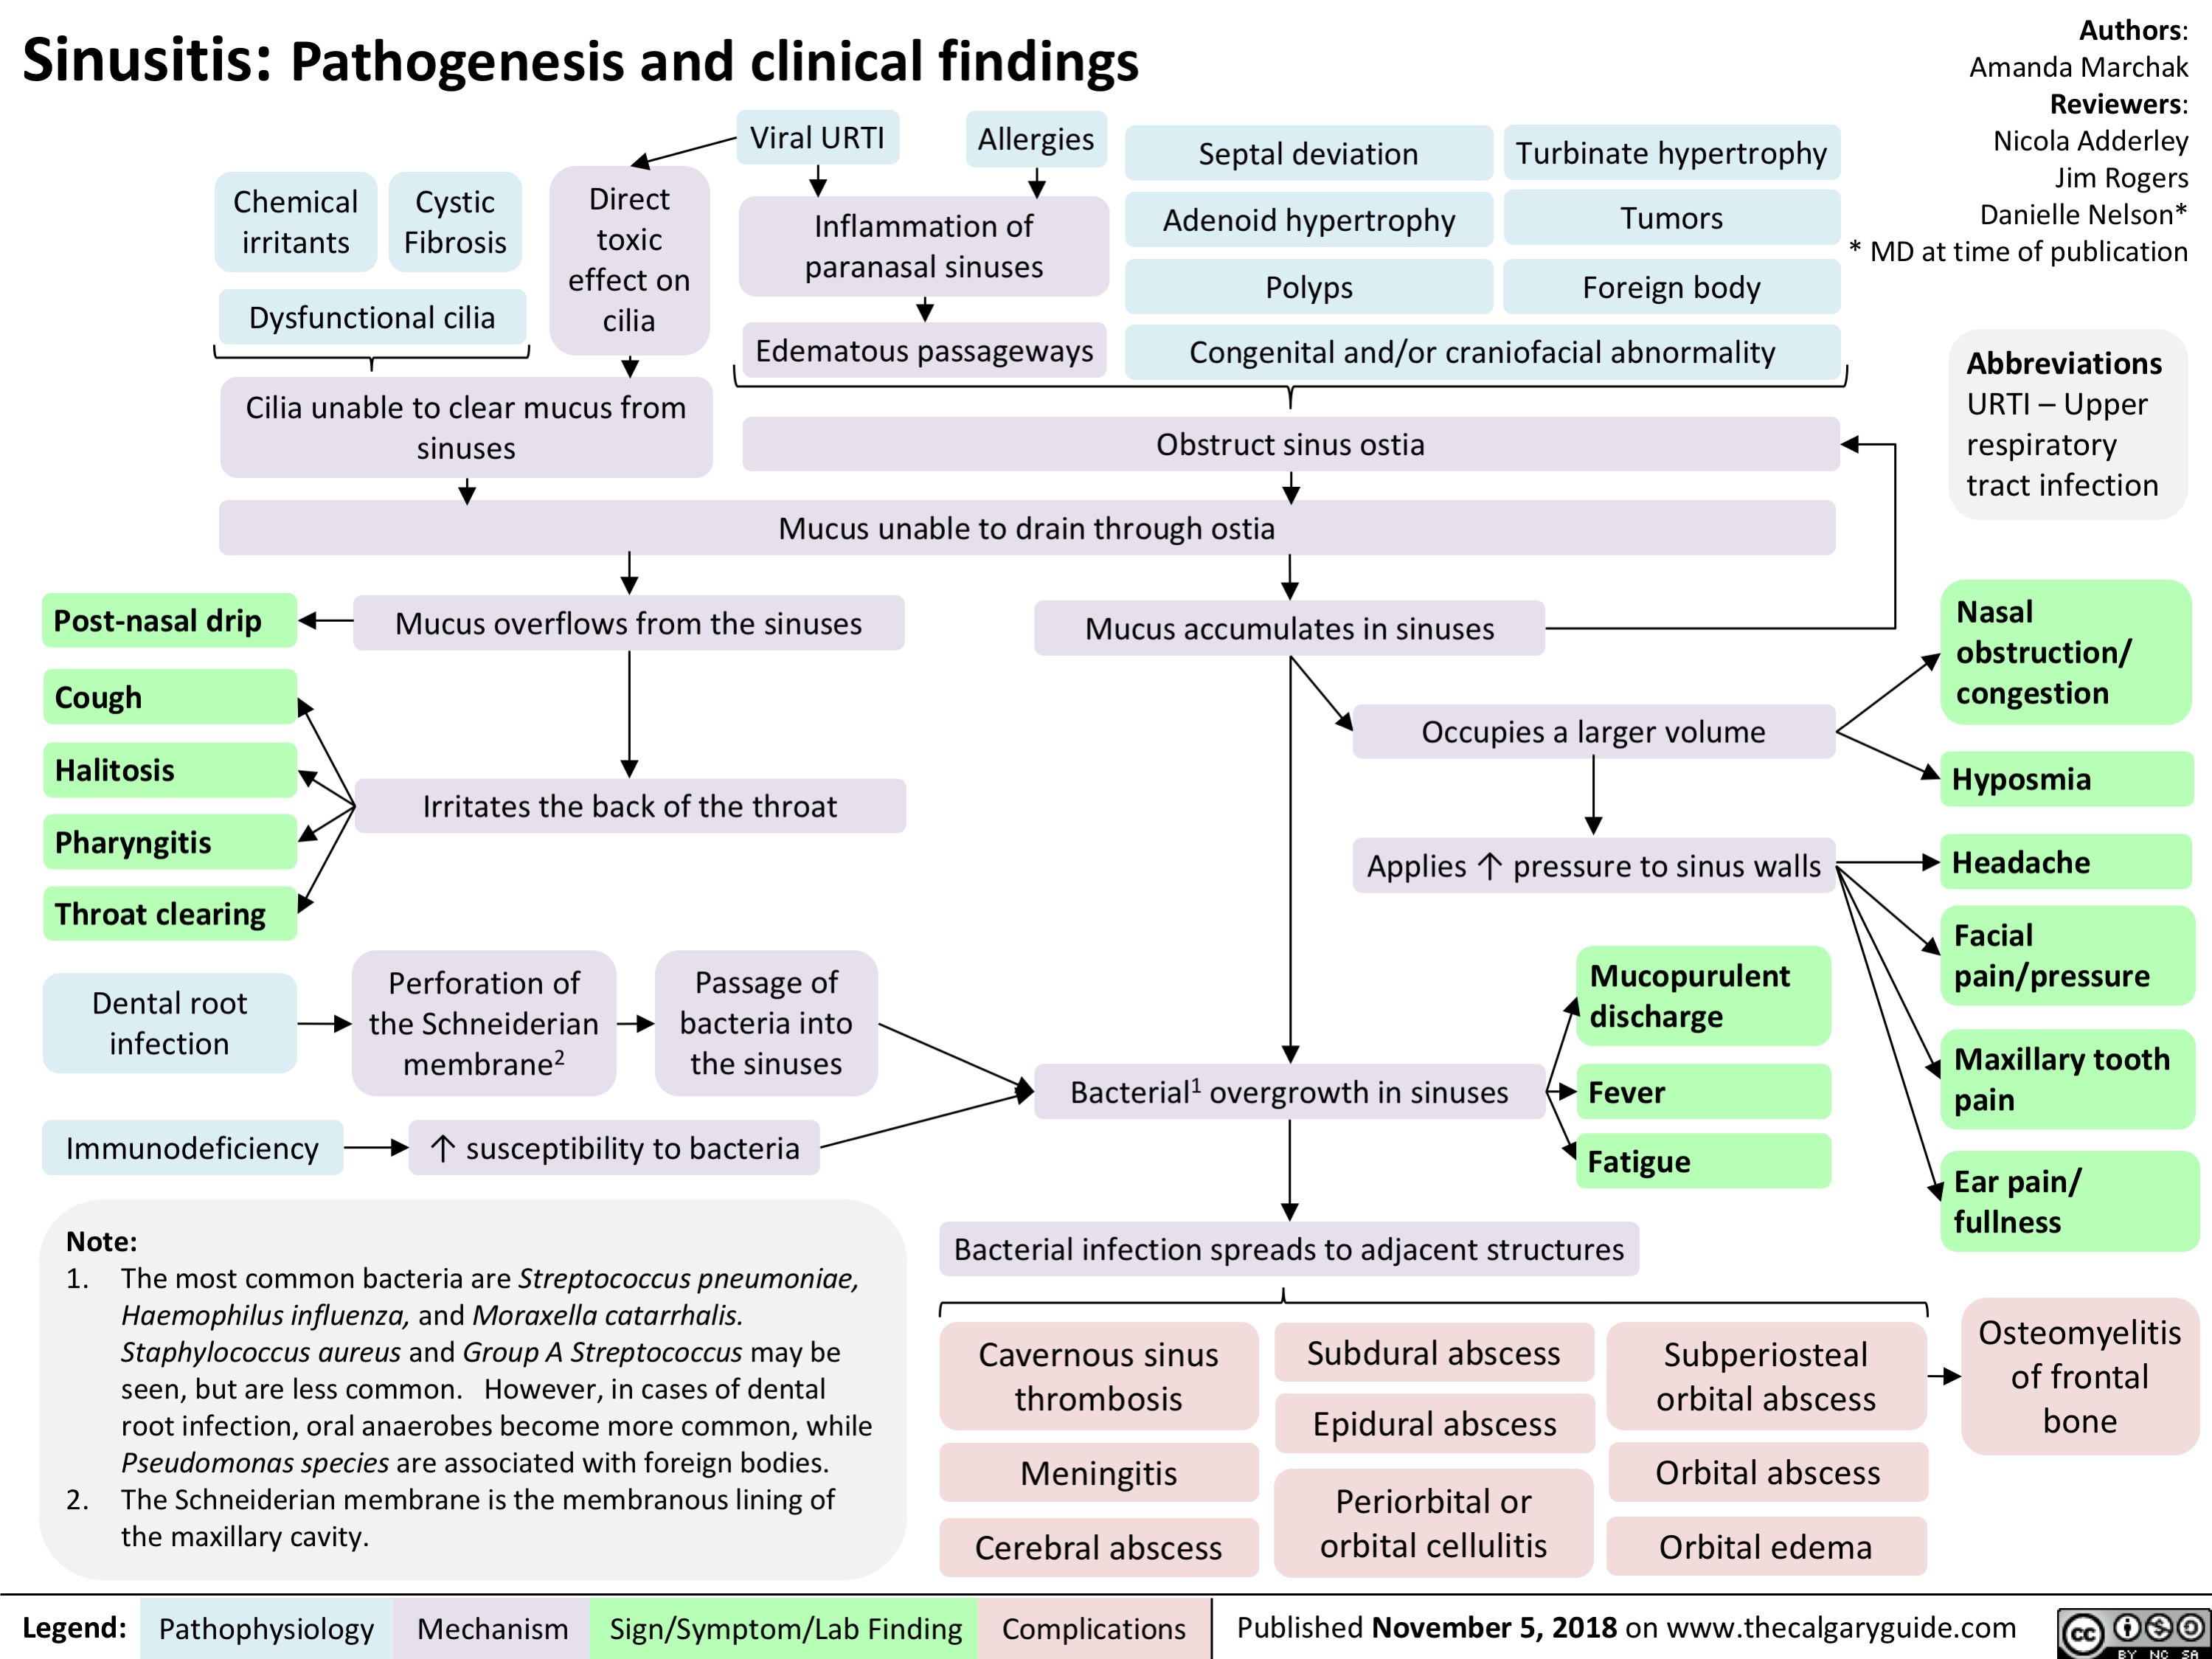 Sinusitis: Pathogenesis and clinical findings
Authors: Amanda Marchak Reviewers: Nicola Adderley Jim Rogers Danielle Nelson* * MD at time of publication
Abbreviations
URTI – Upper respiratory tract infection
Nasal obstruction/ congestion
Hyposmia
Headache
Facial pain/pressure
Maxillary tooth pain
Ear pain/ fullness
Osteomyelitis of frontal bone
          Chemical irritants
Cystic Fibrosis
Direct toxic effect on cilia
Viral URTI Allergies
Inflammation of paranasal sinuses
Edematous passageways
Septal deviation Adenoid hypertrophy Polyps
Turbinate hypertrophy Tumors Foreign body
      Dysfunctional cilia
Congenital and/or craniofacial abnormality Obstruct sinus ostia
       Cilia unable to clear mucus from sinuses
     Mucus unable to drain through ostia
   Post-nasal drip       Mucus overflows from the sinuses Cough
Mucus accumulates in sinuses
Occupies a larger volume
Applies ↑ pressure to sinus walls
Mucopurulent discharge
Bacterial1 overgrowth in sinuses Bacterial infection spreads to adjacent structures
          Halitosis Pharyngitis Throat clearing
Dental root infection
Immunodeficiency
Note:
Irritates the back of the throat
              Perforation of the Schneiderian membrane2
Passage of bacteria into the sinuses
Fever
Fatigue
Subperiosteal orbital abscess
Orbital abscess Orbital edema
            ↑ susceptibility to bacteria
     1. The most common bacteria are Streptococcus pneumoniae, Haemophilus influenza, and Moraxella catarrhalis. Staphylococcus aureus and Group A Streptococcus may be seen, but are less common. However, in cases of dental root infection, oral anaerobes become more common, while Pseudomonas species are associated with foreign bodies.
2. The Schneiderian membrane is the membranous lining of the maxillary cavity.
Cavernous sinus thrombosis
Meningitis Cerebral abscess
Subdural abscess Epidural abscess
Periorbital or orbital cellulitis
             Legend:
 Pathophysiology
 Mechanism
Sign/Symptom/Lab Finding
  Complications
Published November 5, 2018 on www.thecalgaryguide.com
   